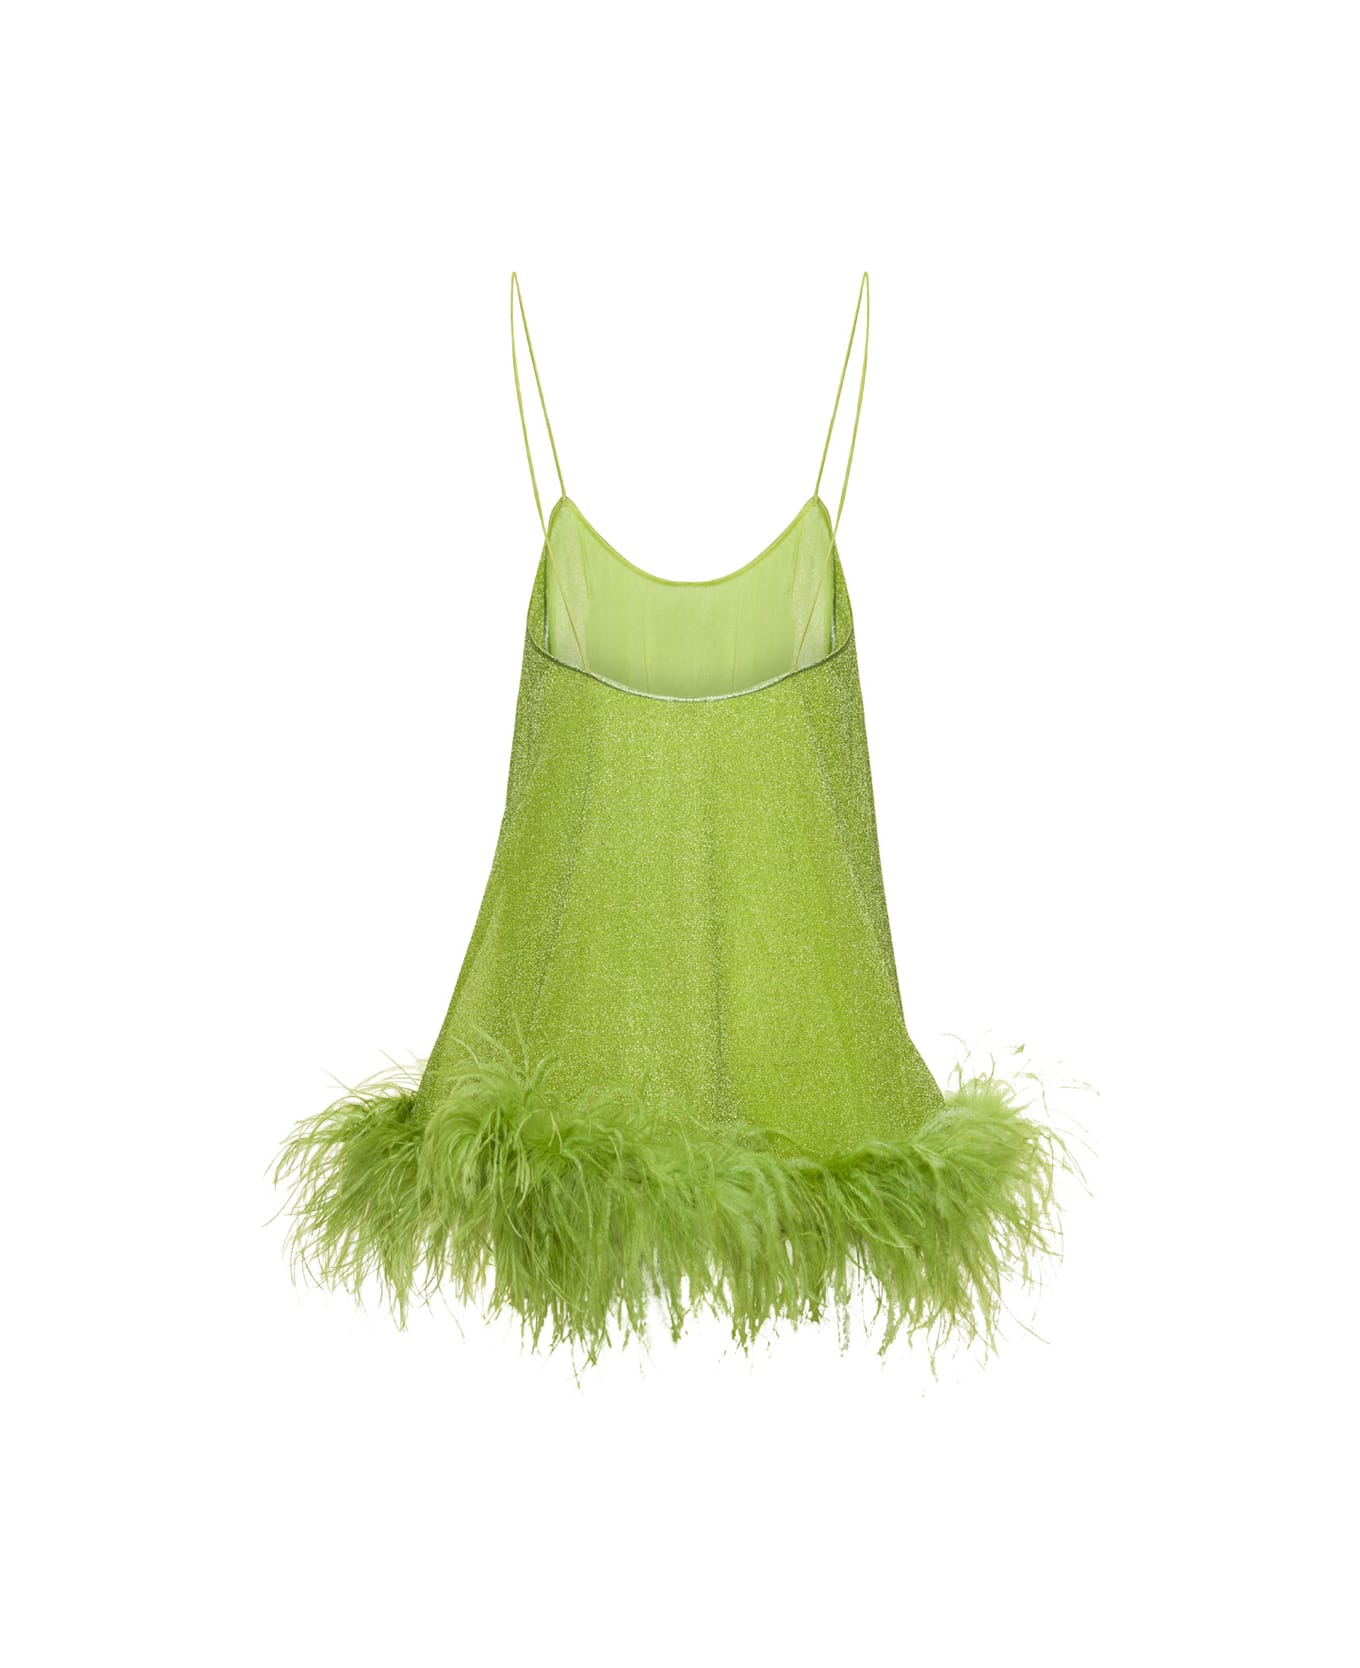 Oseree Green Mini Dress With Feathers In Lurex Woman - Green キャミソール